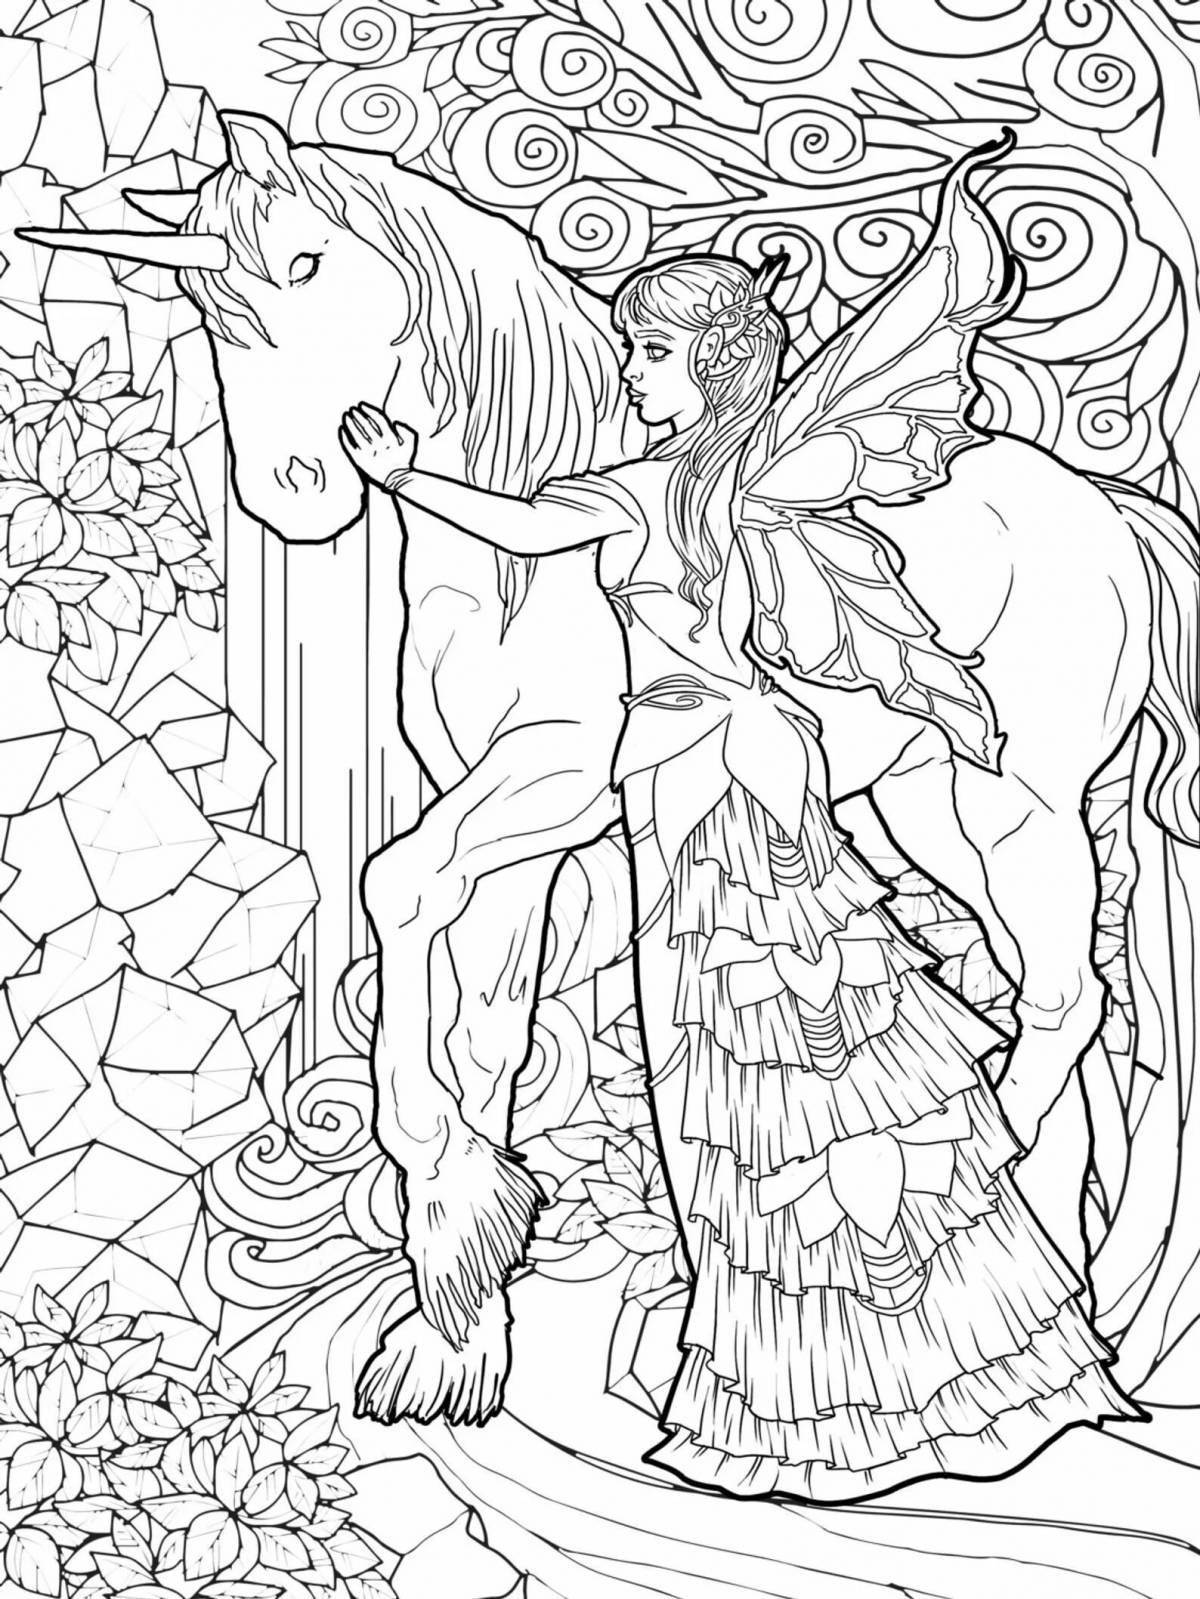 Adorable coloring pages fairies and unicorns